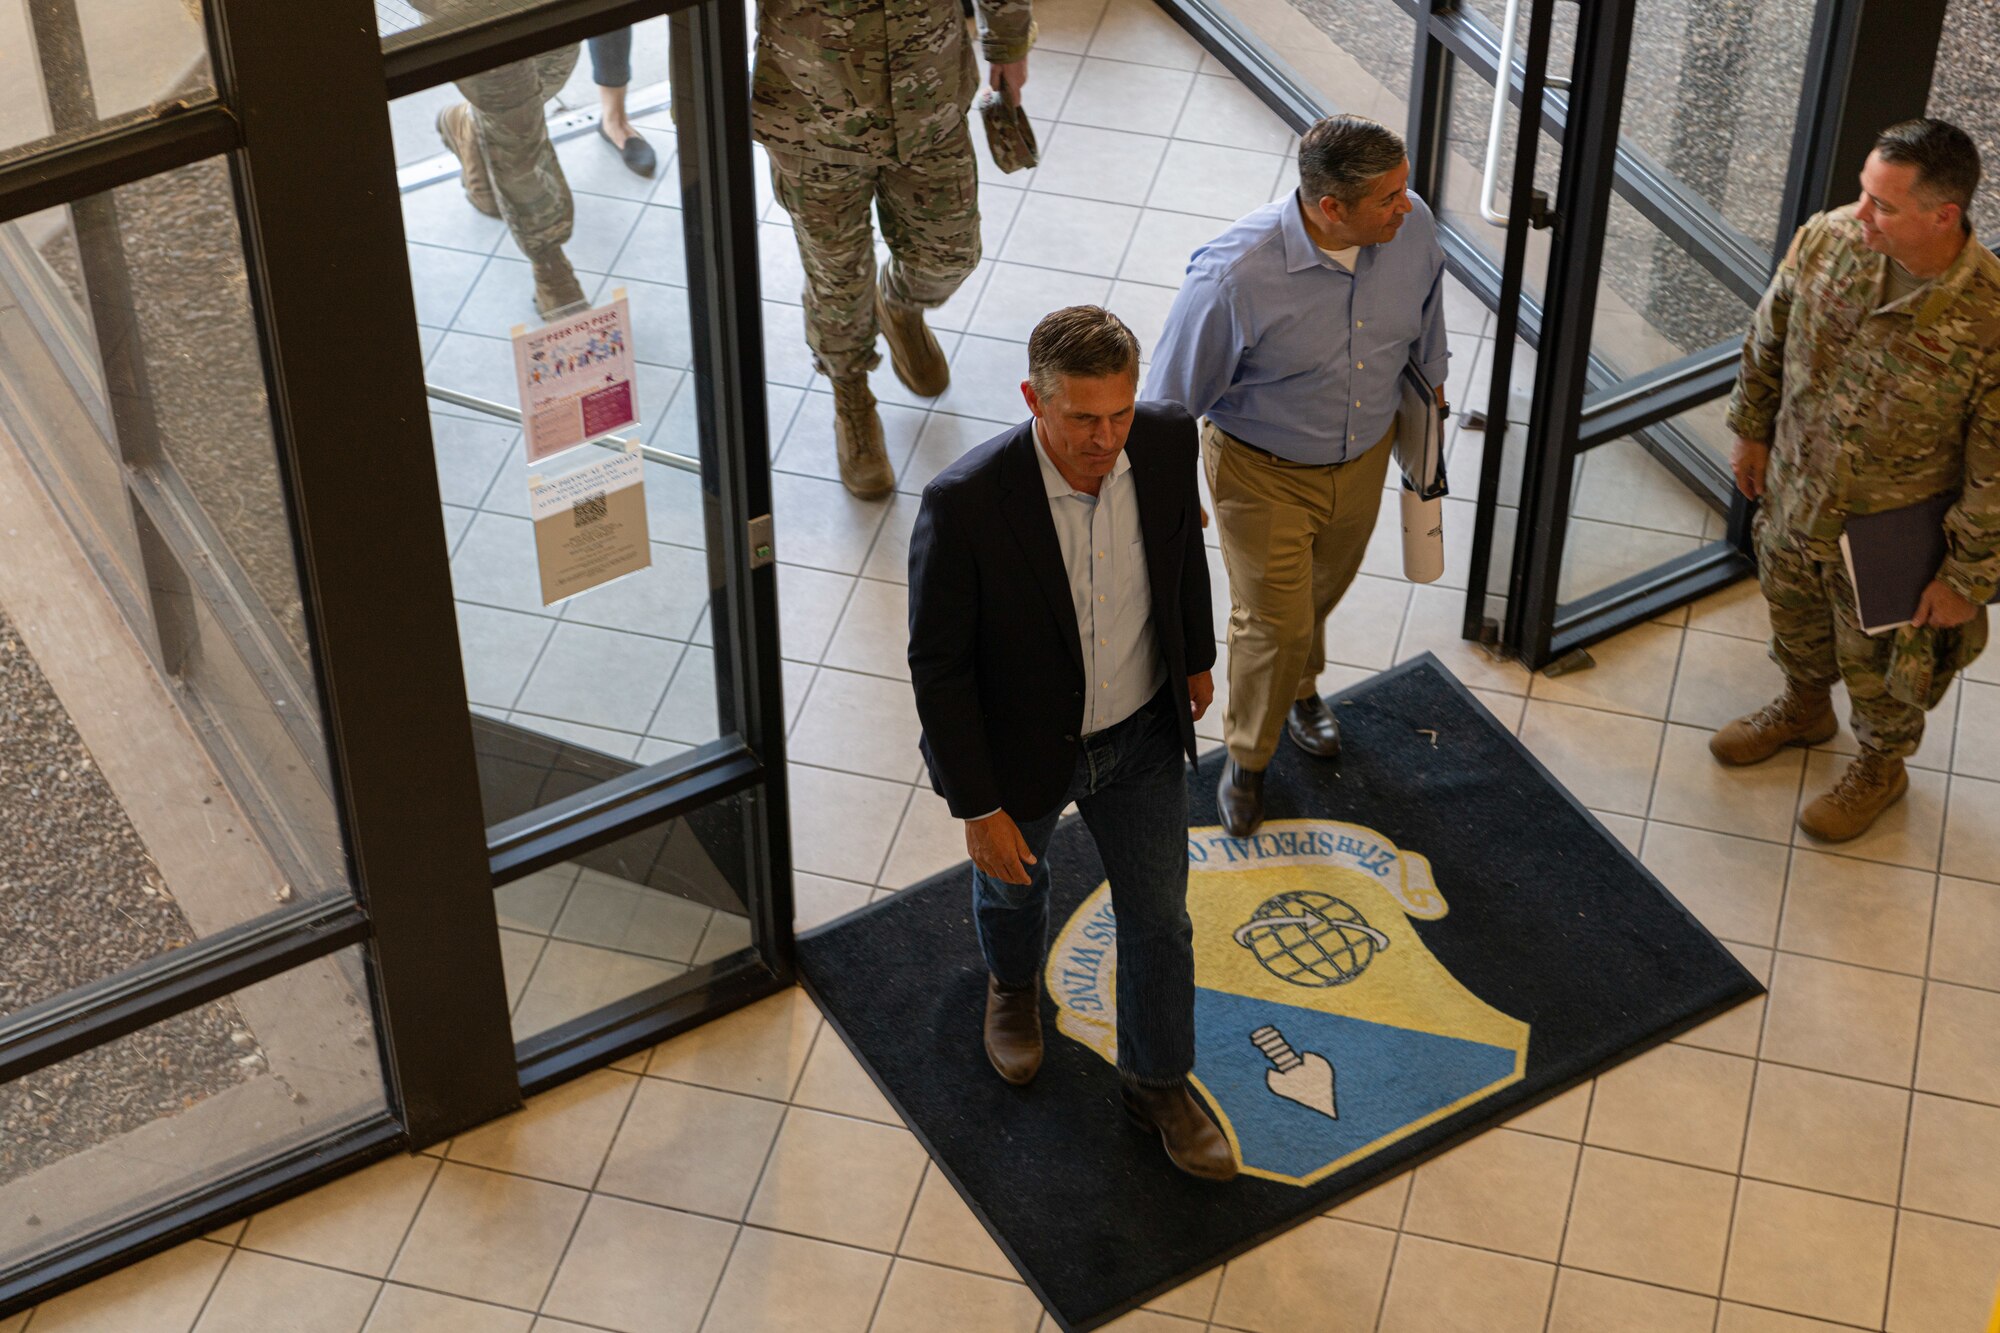 New Mexico Senators Martin Heinrich and Ben Ray Lujan arrive at the 27th Special Operations Wing headquarters during a visit to Cannon Air Force Base, N.M., Aug. 22, 2023. Lt. Gen. Tony Bauernfeind, Air Force Special Operations Command commander and the 27 SOW leadership team hosted a meeting to discuss transforming AFSOC force structure for a fifth power projection wing, greater force development, and growth for Air Commandos with congressional and community leaders. (U.S. Air Force photo by Senior Airman Drew Cyburt)